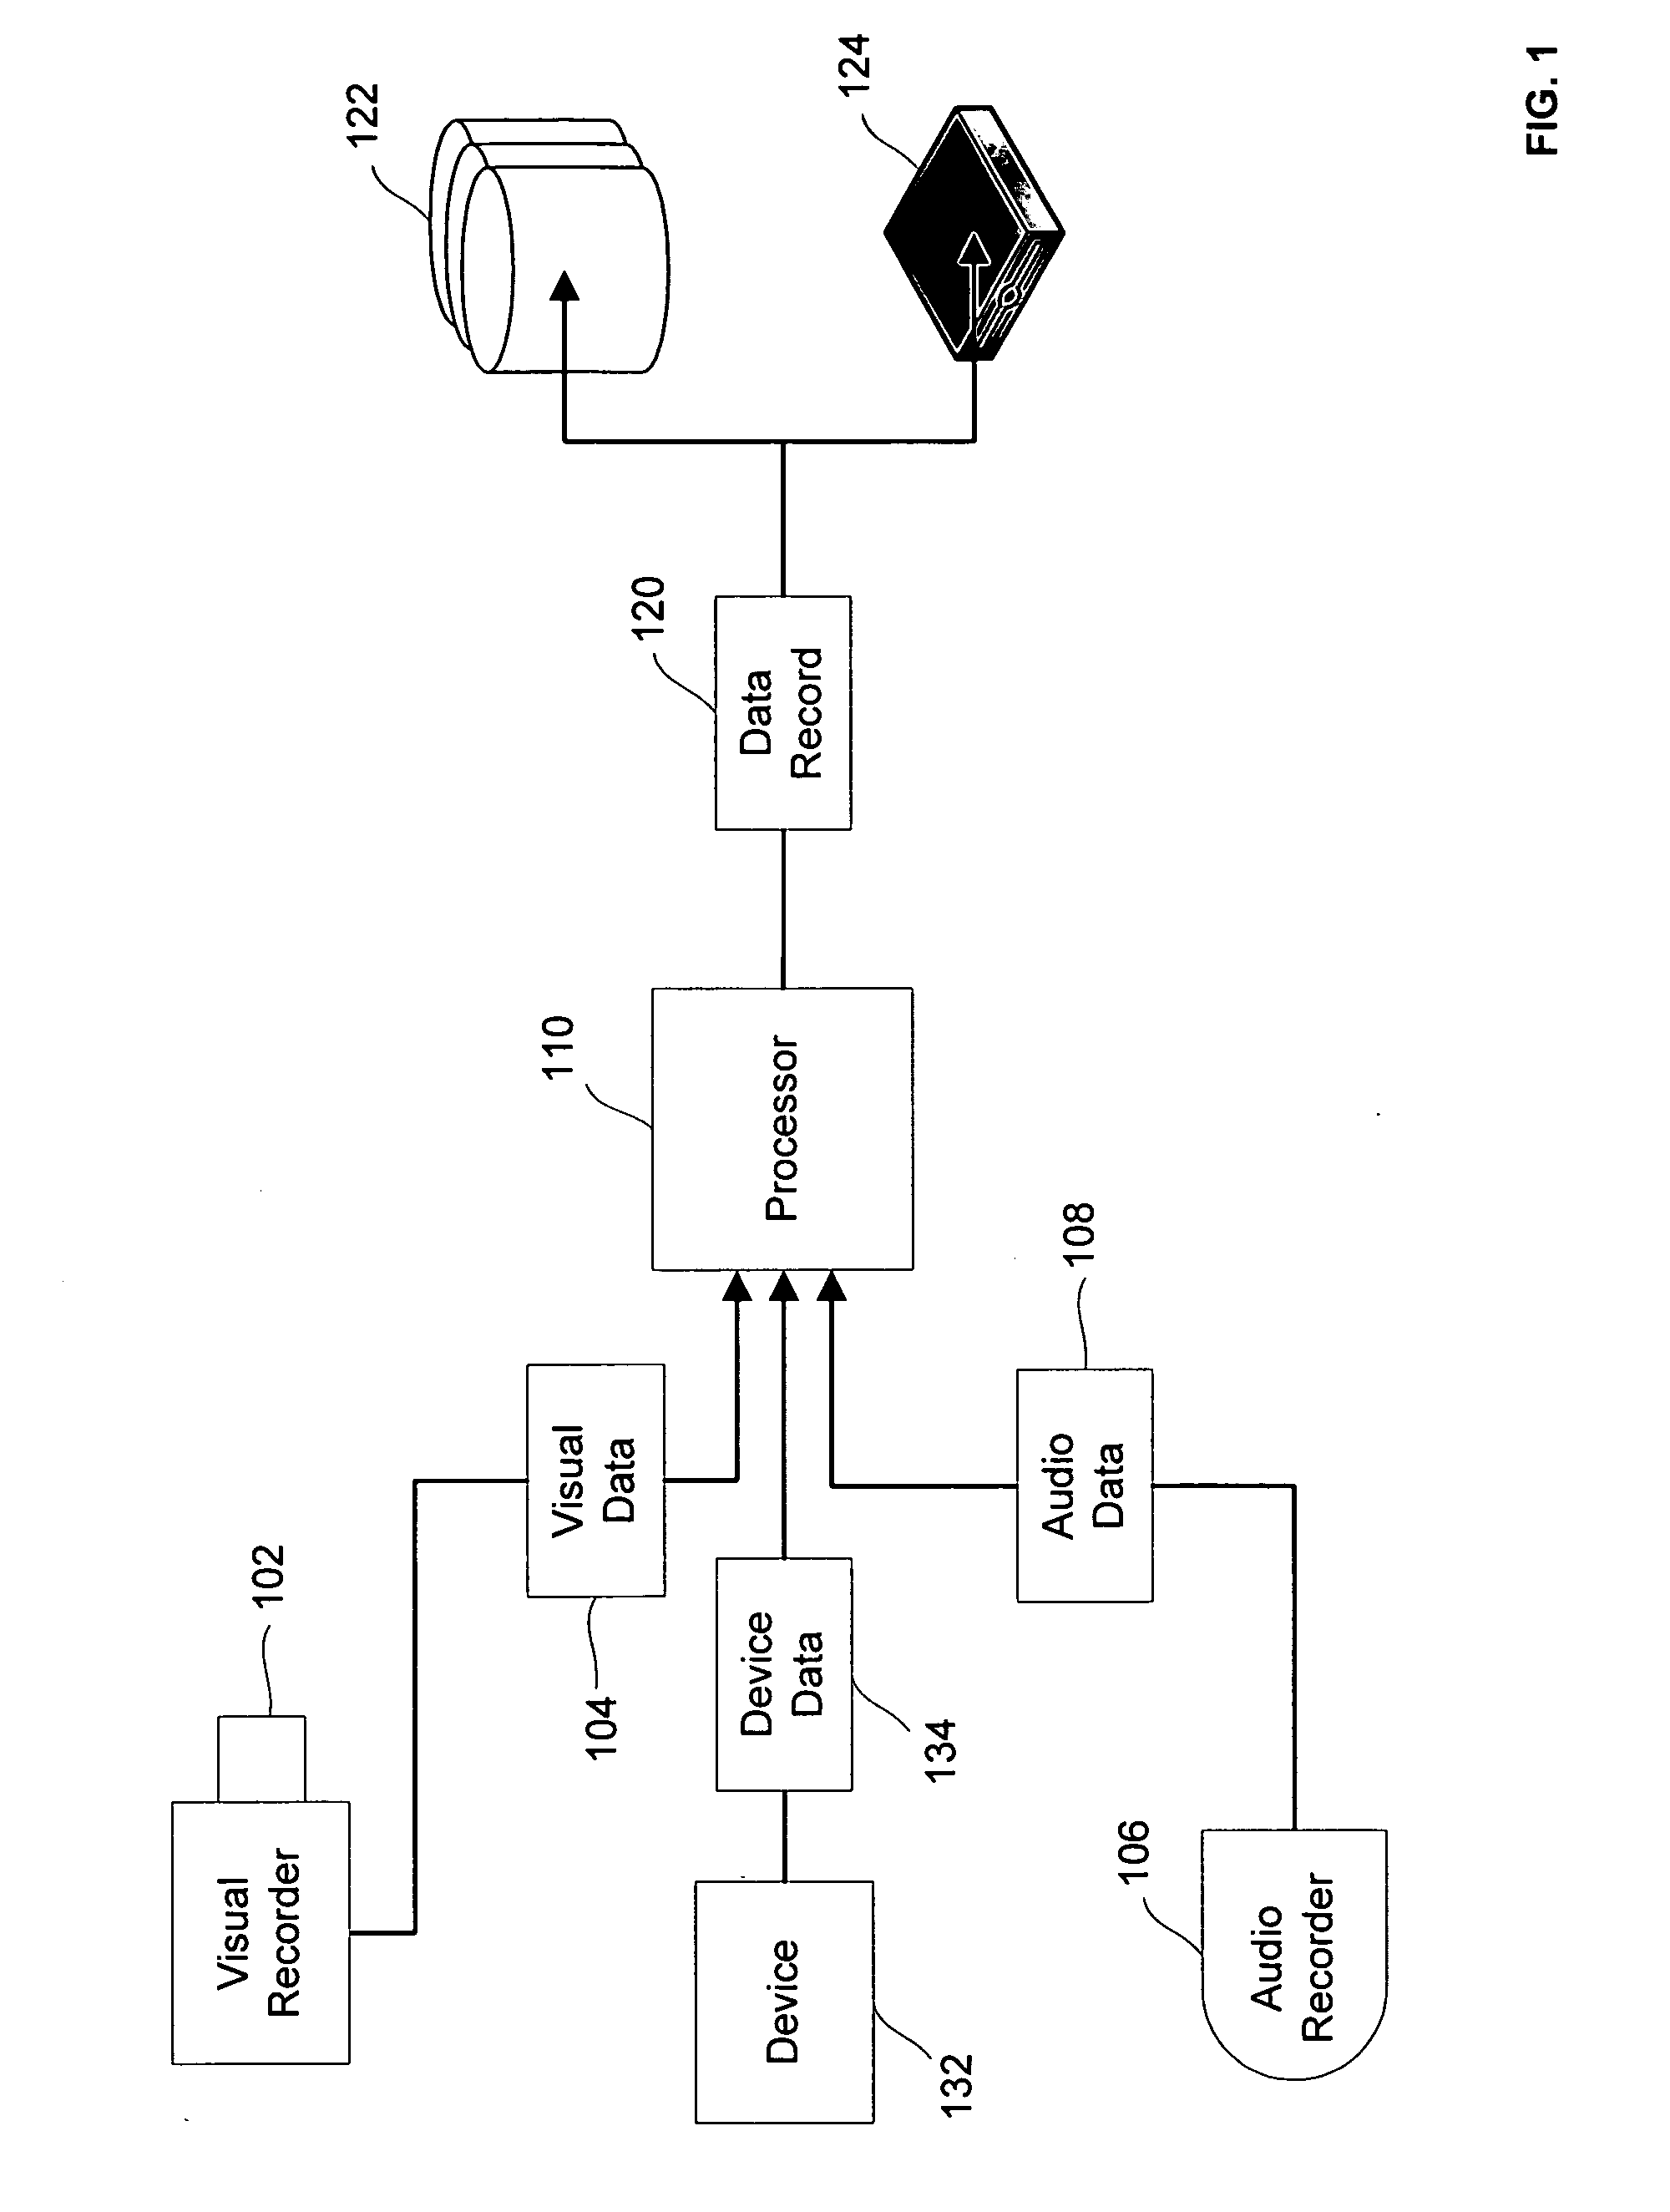 Audio, Visual and device data capturing system with real-time speech recognition command and control system